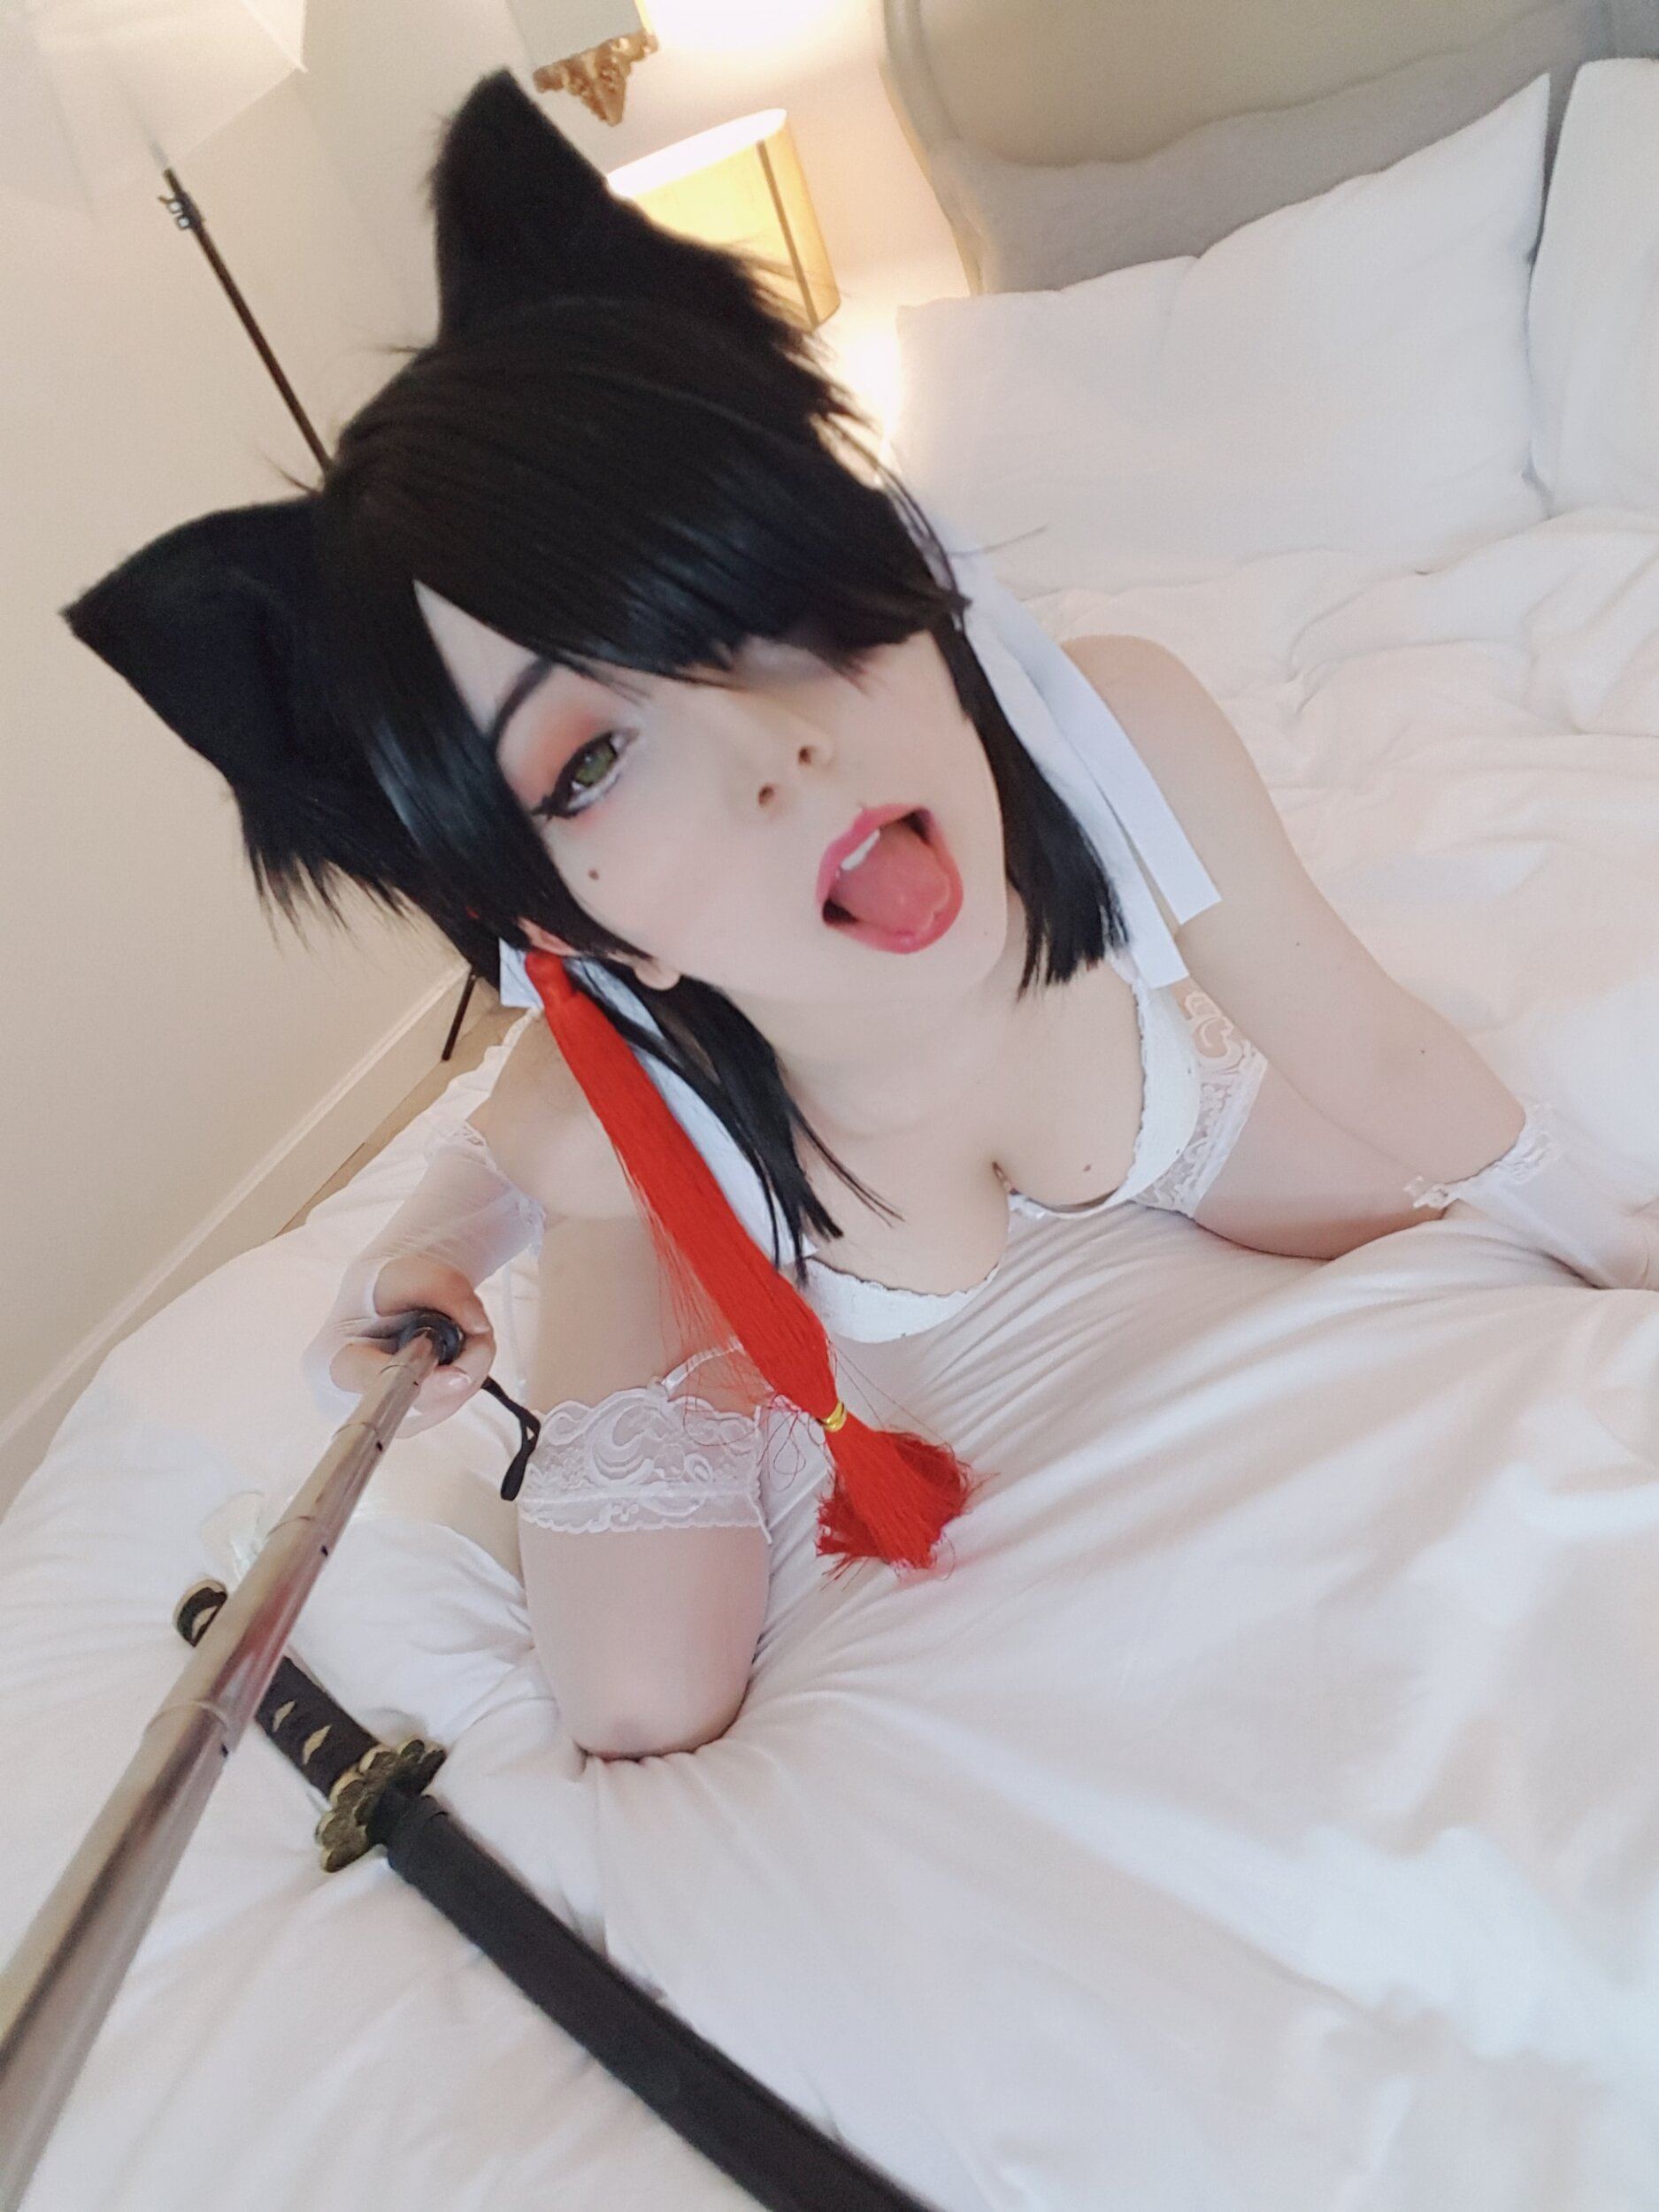 Nude Latest Koneko Leaked Photos Onlyfans Cosplays Holly Wolf